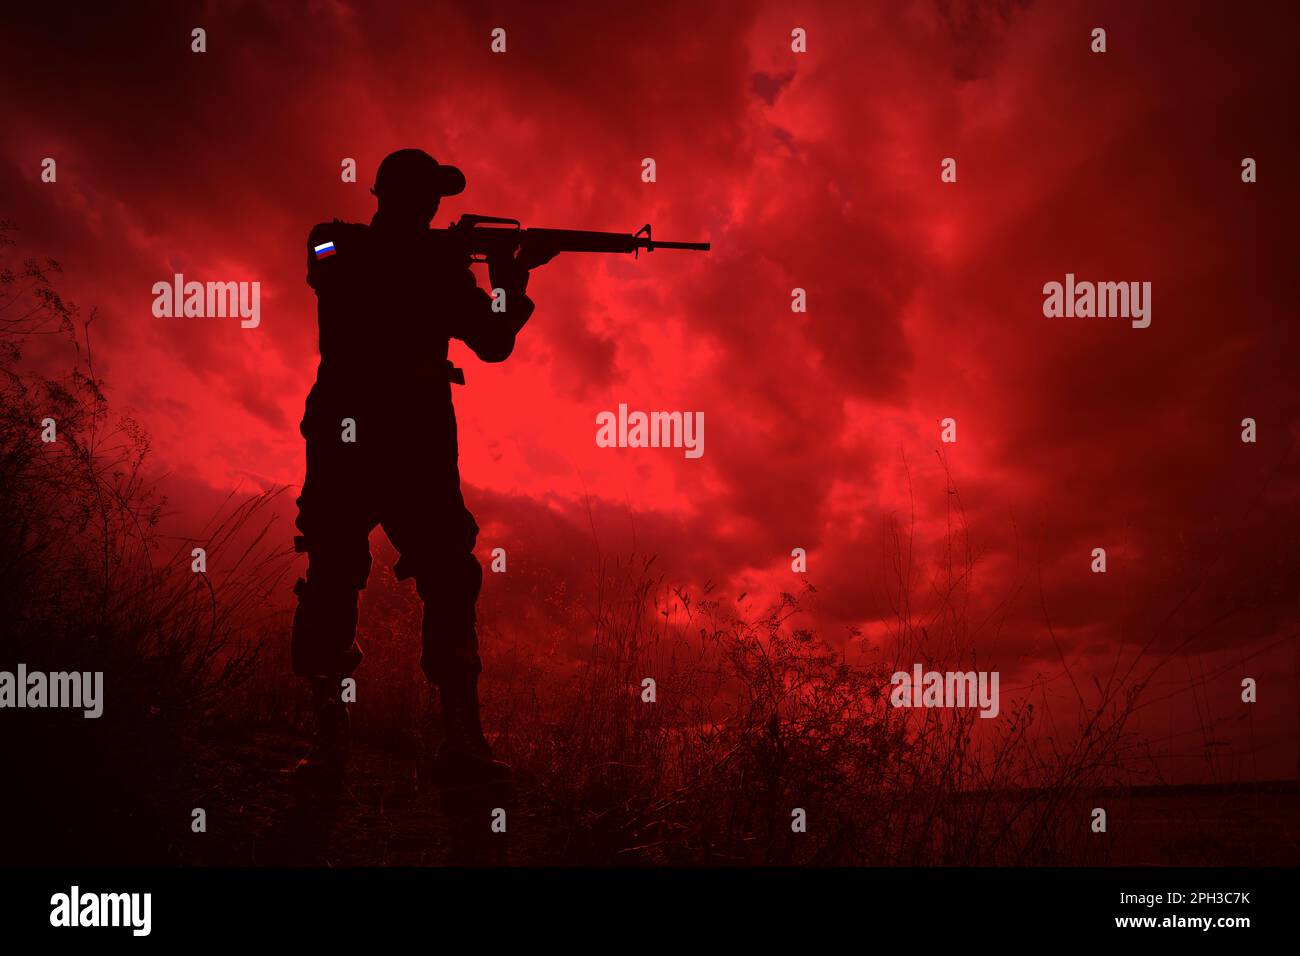 Russian invasion of Ukraine. Silhouette of armed soldier from Russia outdoors, toned in red Stock Photo